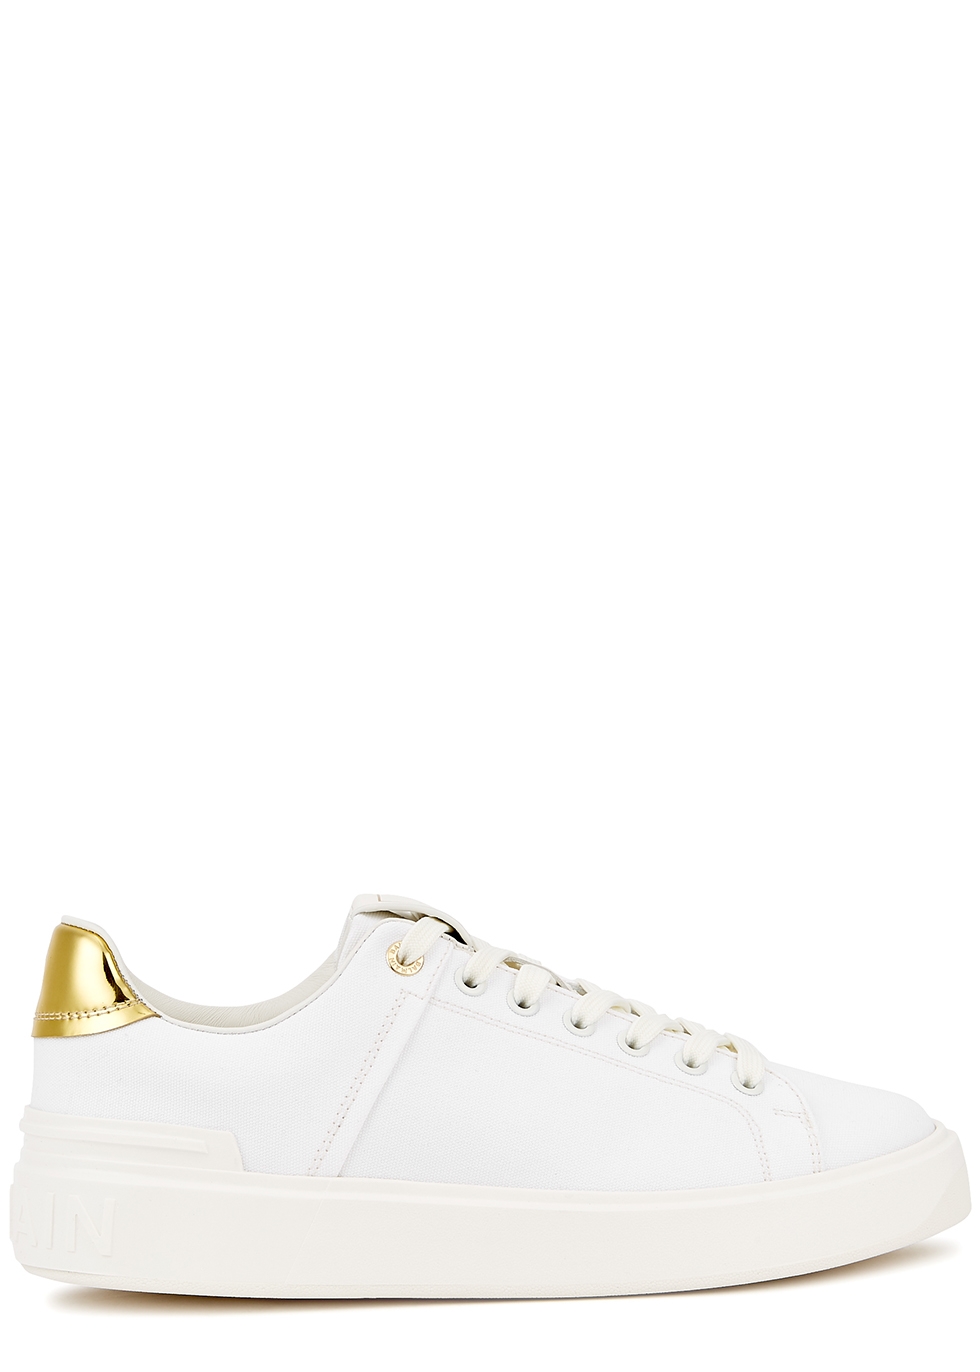 B-Court white canvas sneakers